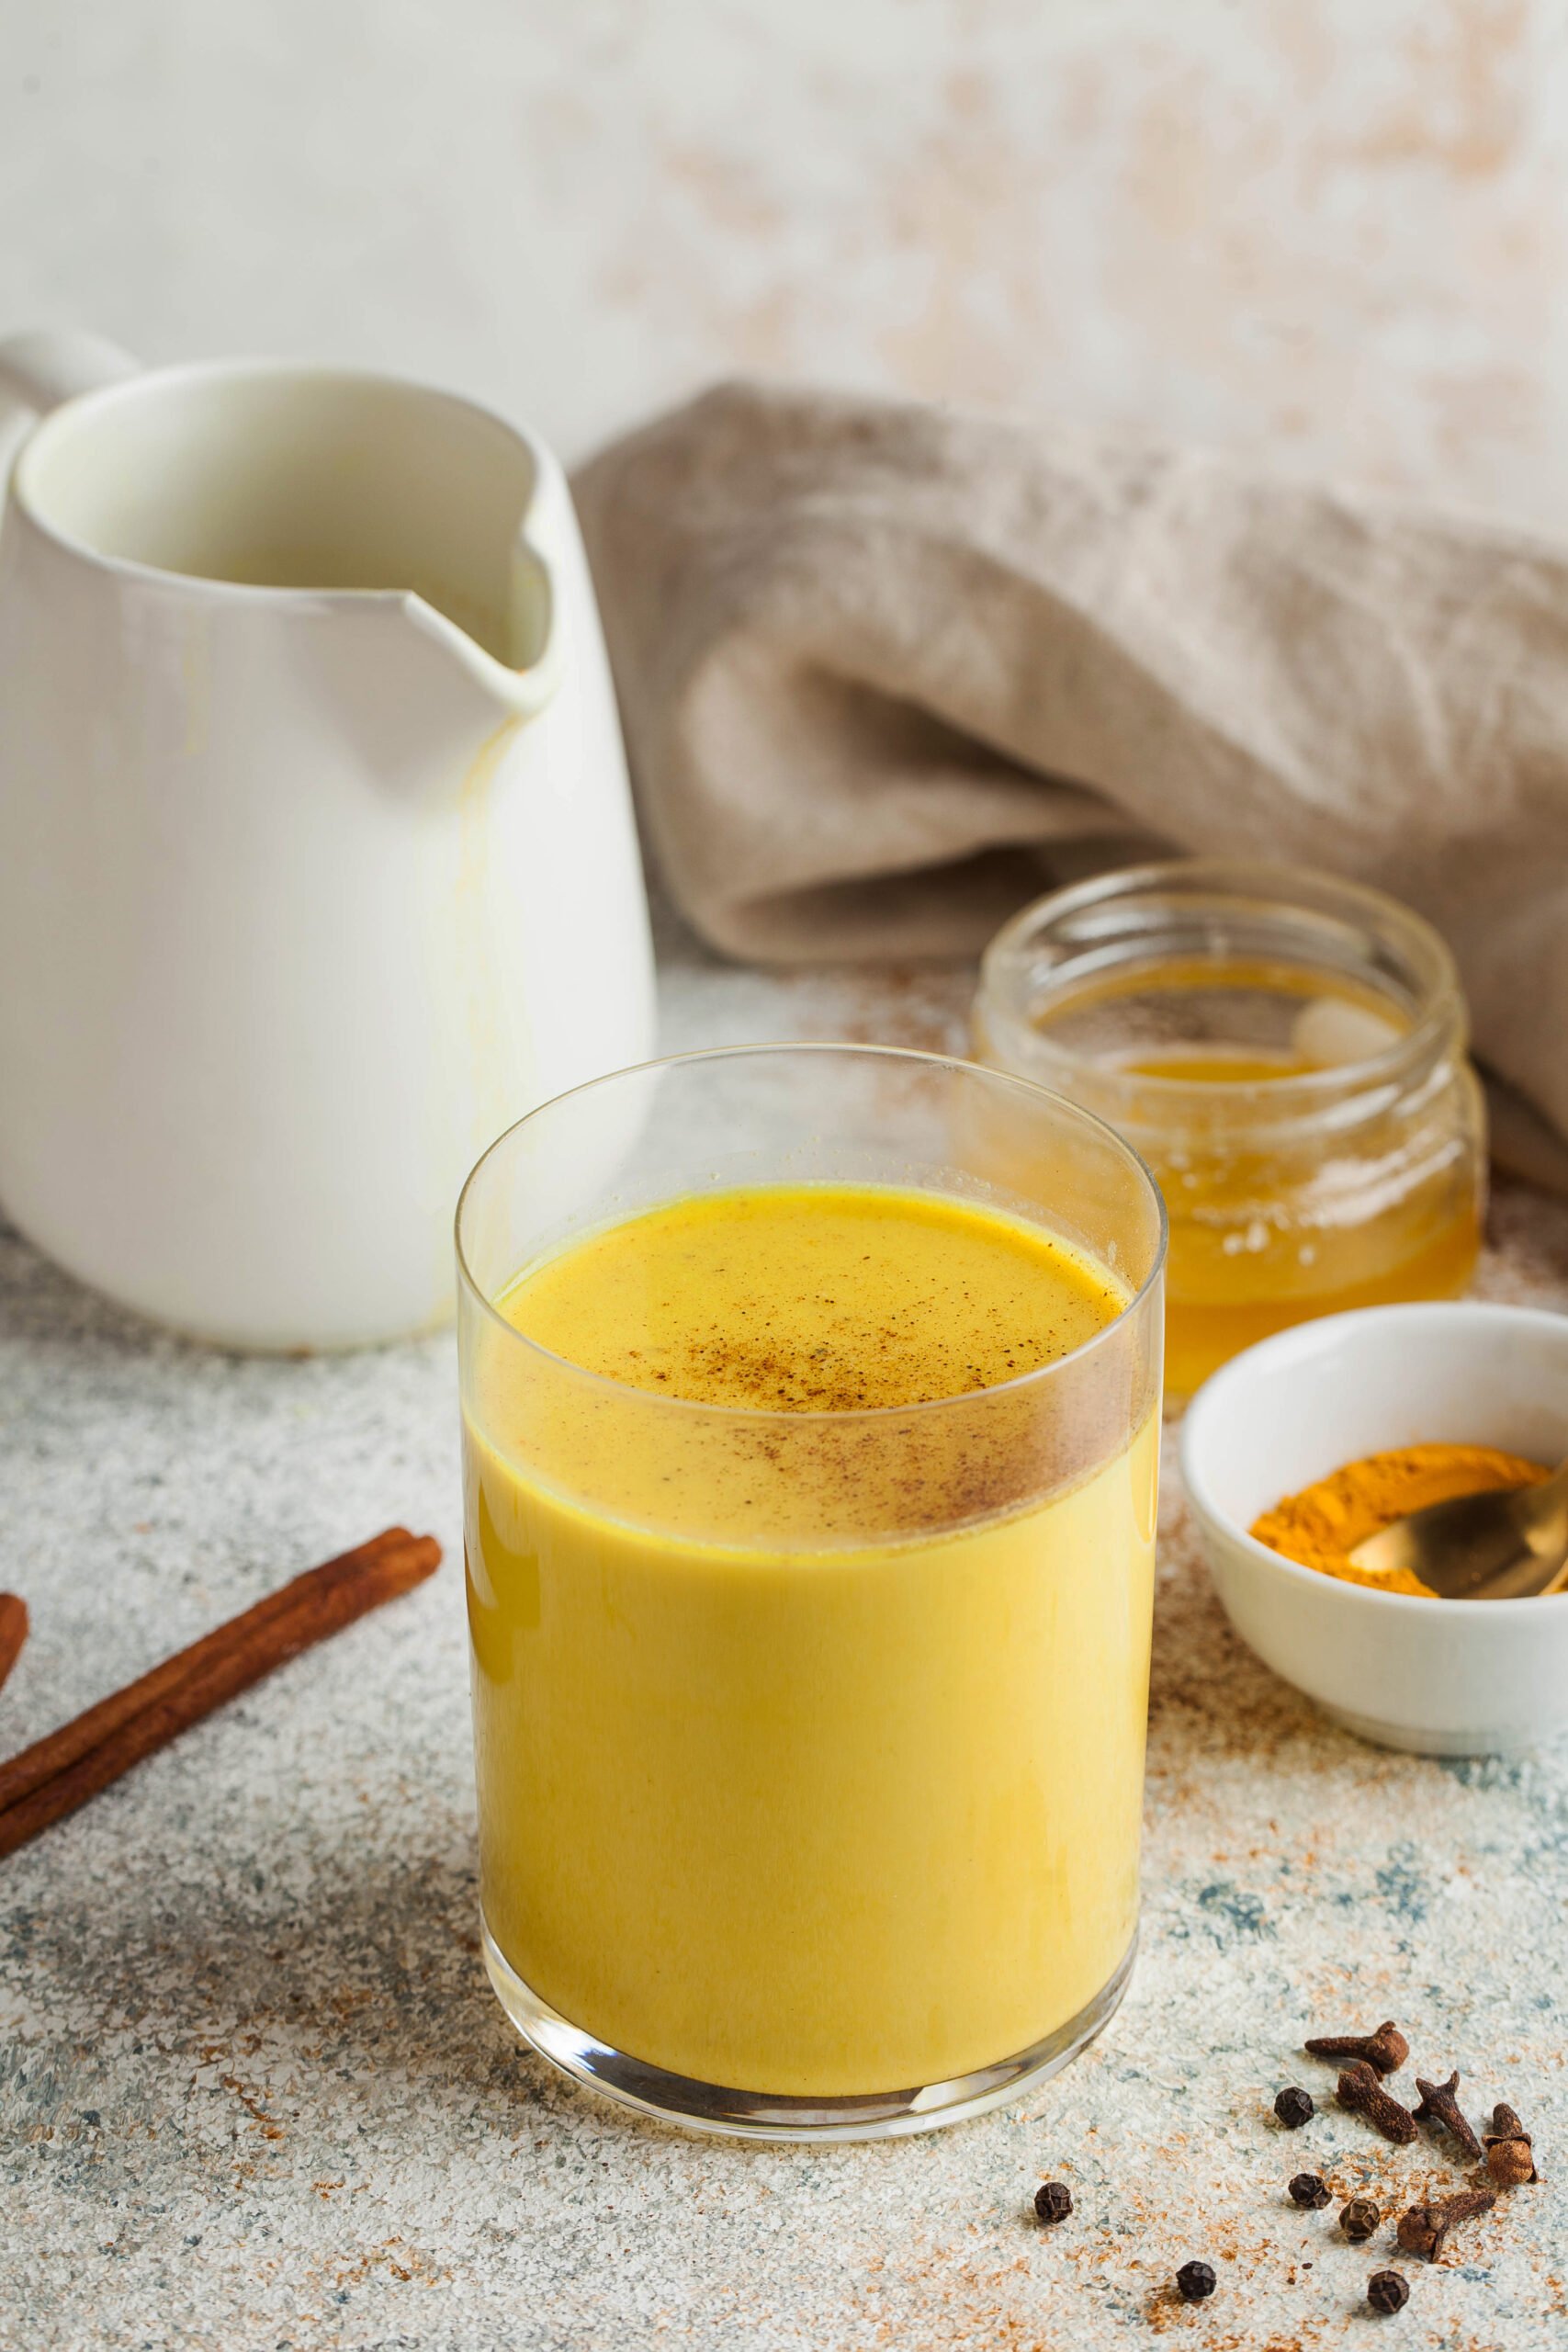 Looking for a warm and healthy drink? Try this Turmeric Latte Recipe made with fragrant spices and your choice of milk. This easy and delicious recipe is packed with the health benefits of turmeric, ginger, and cinnamon. Moon milk for better sleep. Turmeric Golden milk with cinnamon, honey. A trendy relaxing drink before going to bed. Ayurvedic drink. High quality photo